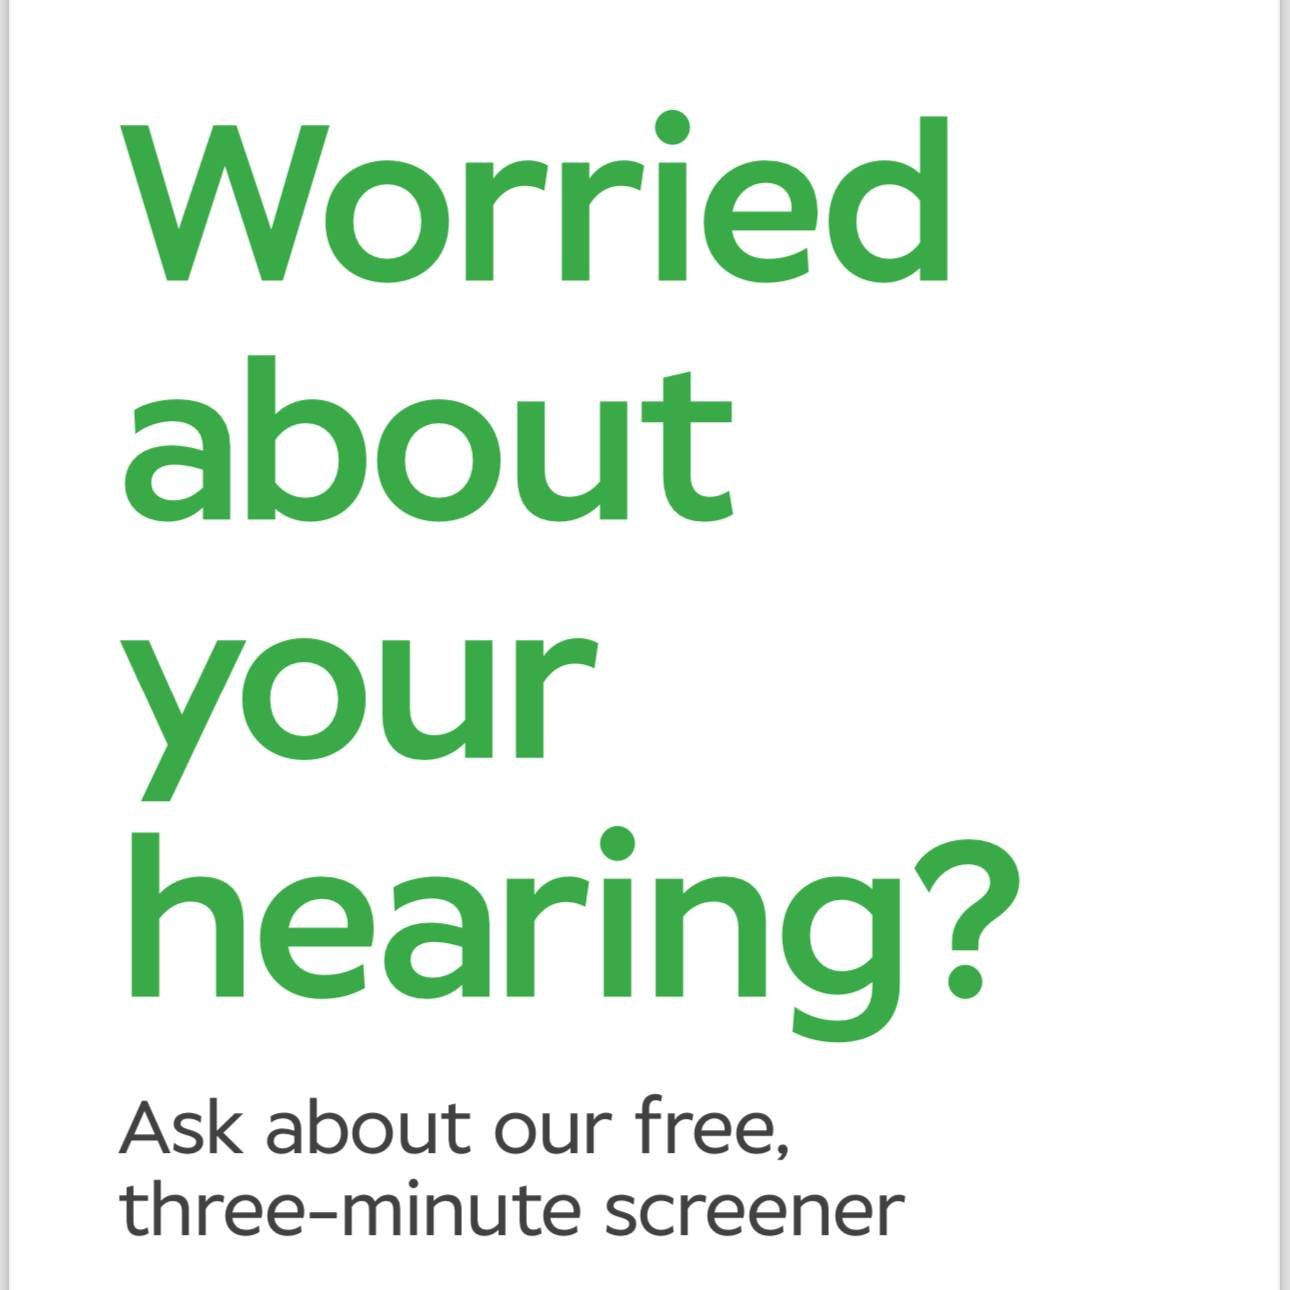 🌸👓As we approach the bank holiday weekend and welcome the spring season, why not treat yourself to a long-awaited sight test or a complimentary hearing screening at Specsavers Hemel Hempstead? 👂🌸

With roots in Hemel Hempstead since 1995, Specsav